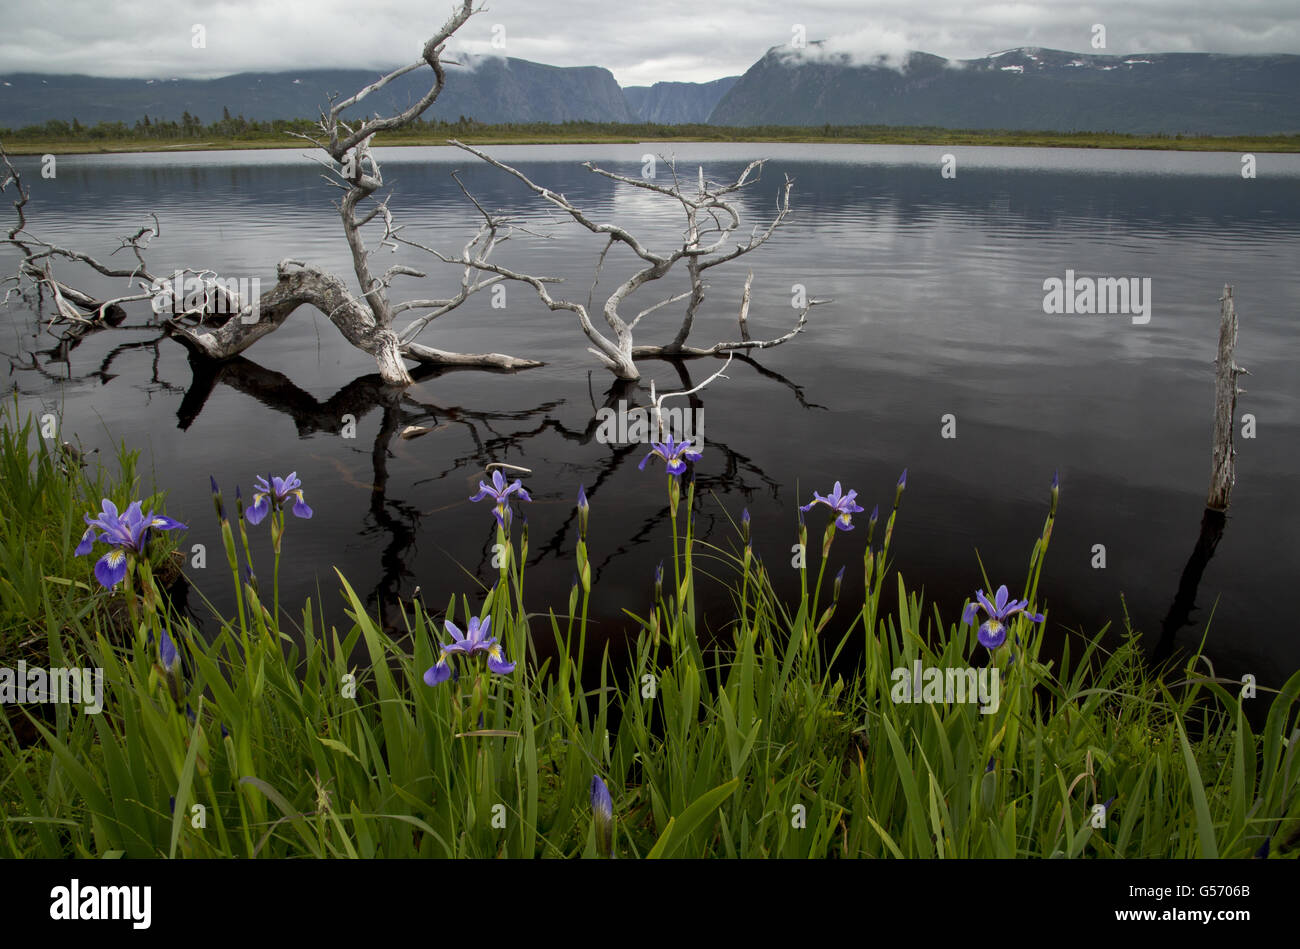 Blue Flag Iris (Iris versicolor) flowering, growing at edge of water, with Long Range Mountains in background, Jerry's Pond, Western Brook, Gros Morne N.P., Newfoundland, Canada, July Stock Photo